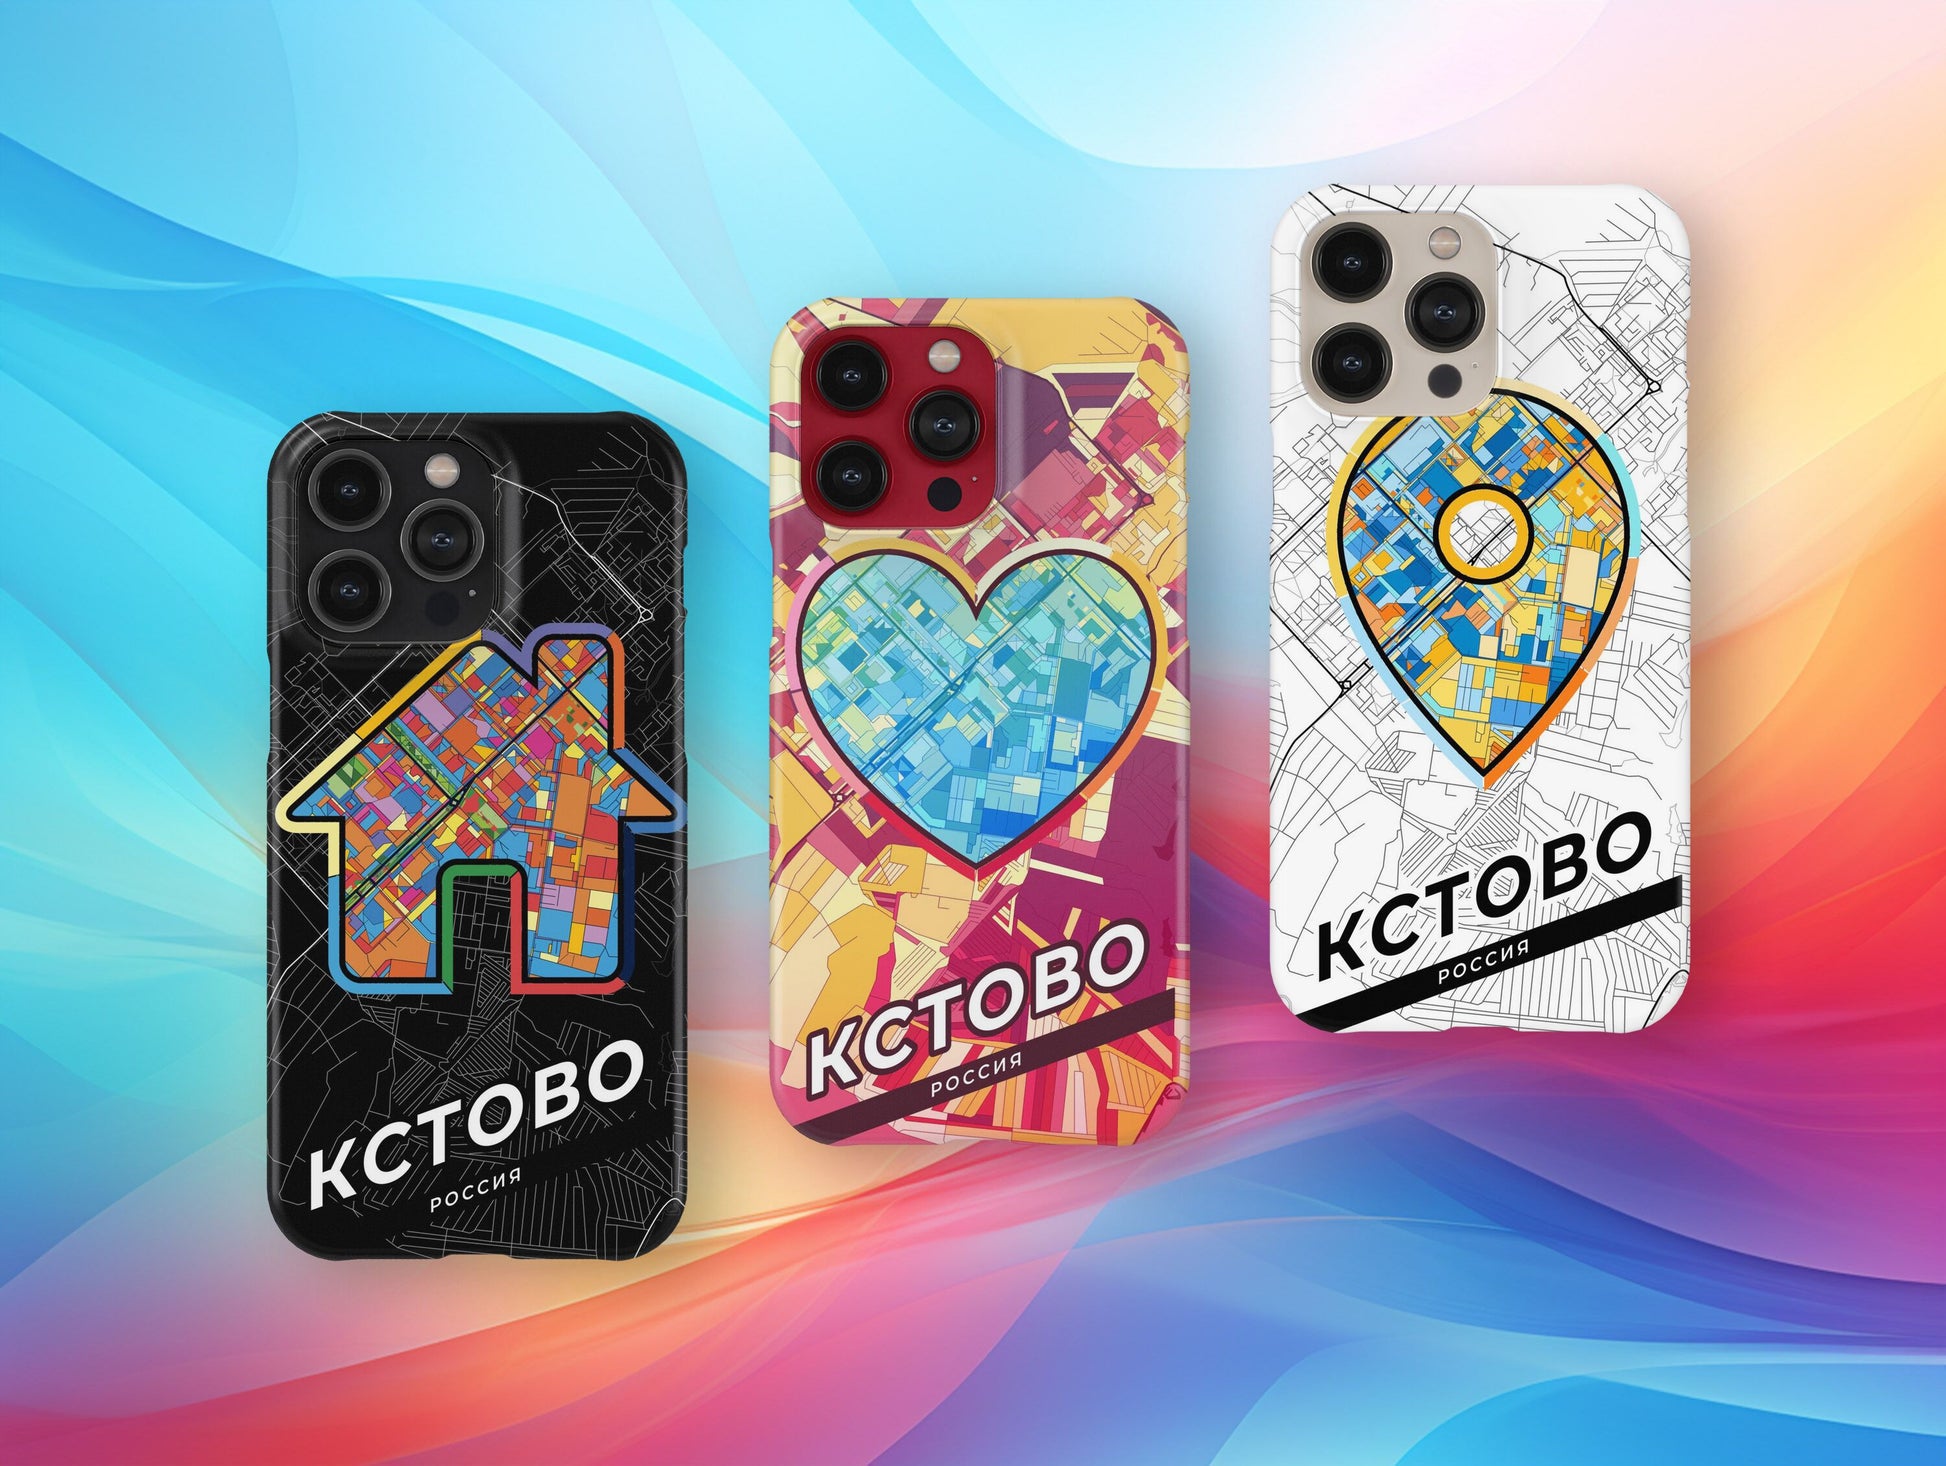 Kstovo Russia slim phone case with colorful icon. Birthday, wedding or housewarming gift. Couple match cases.